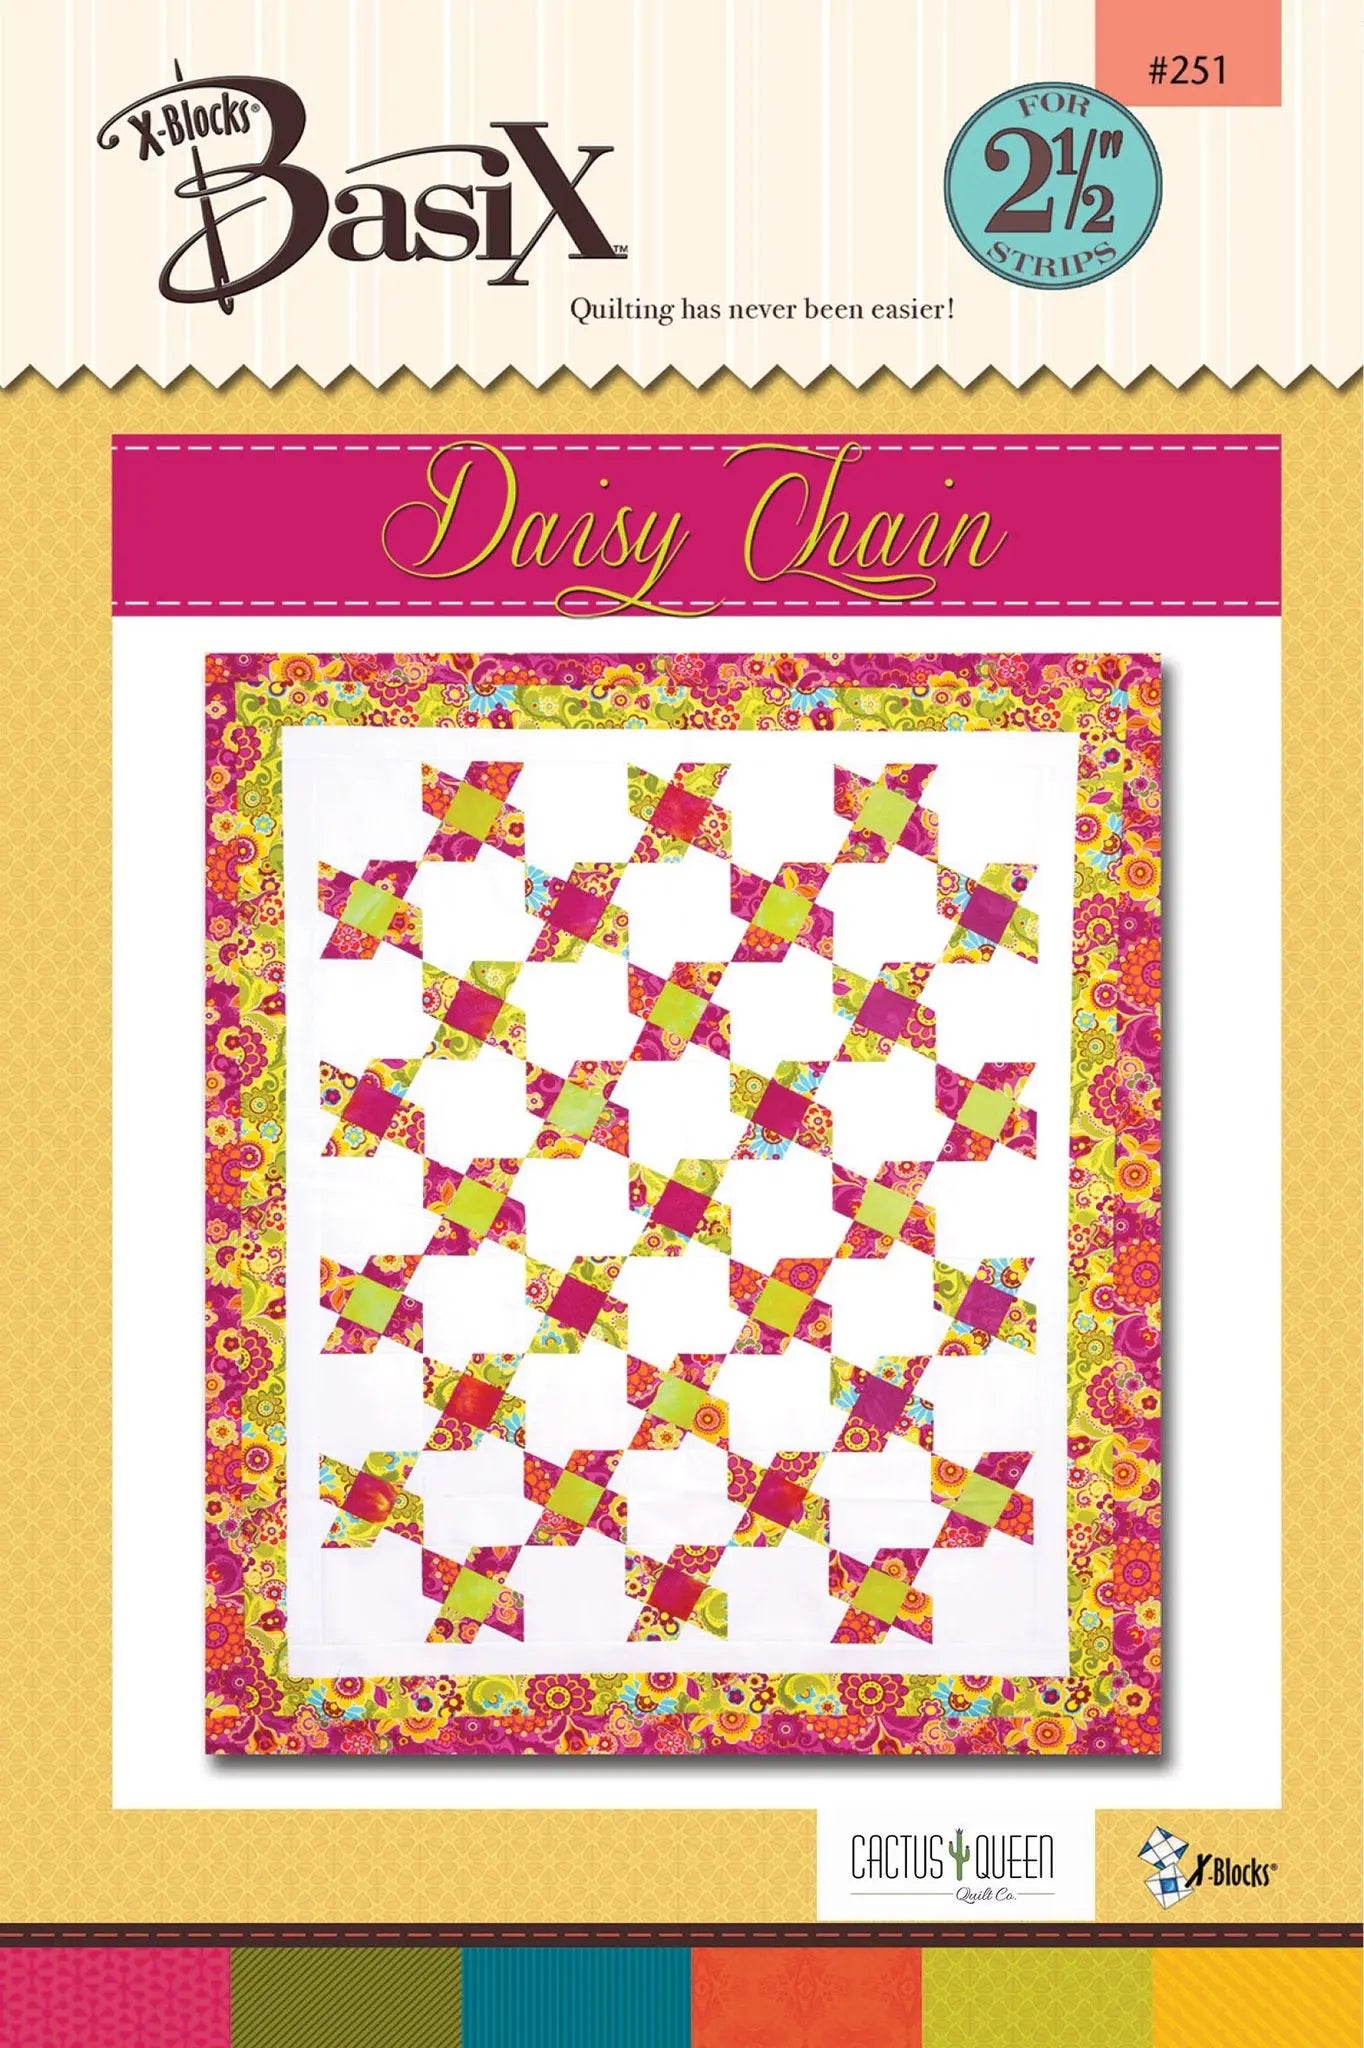 BasiX Daisy Chain Pattern - Linda's Electric Quilters